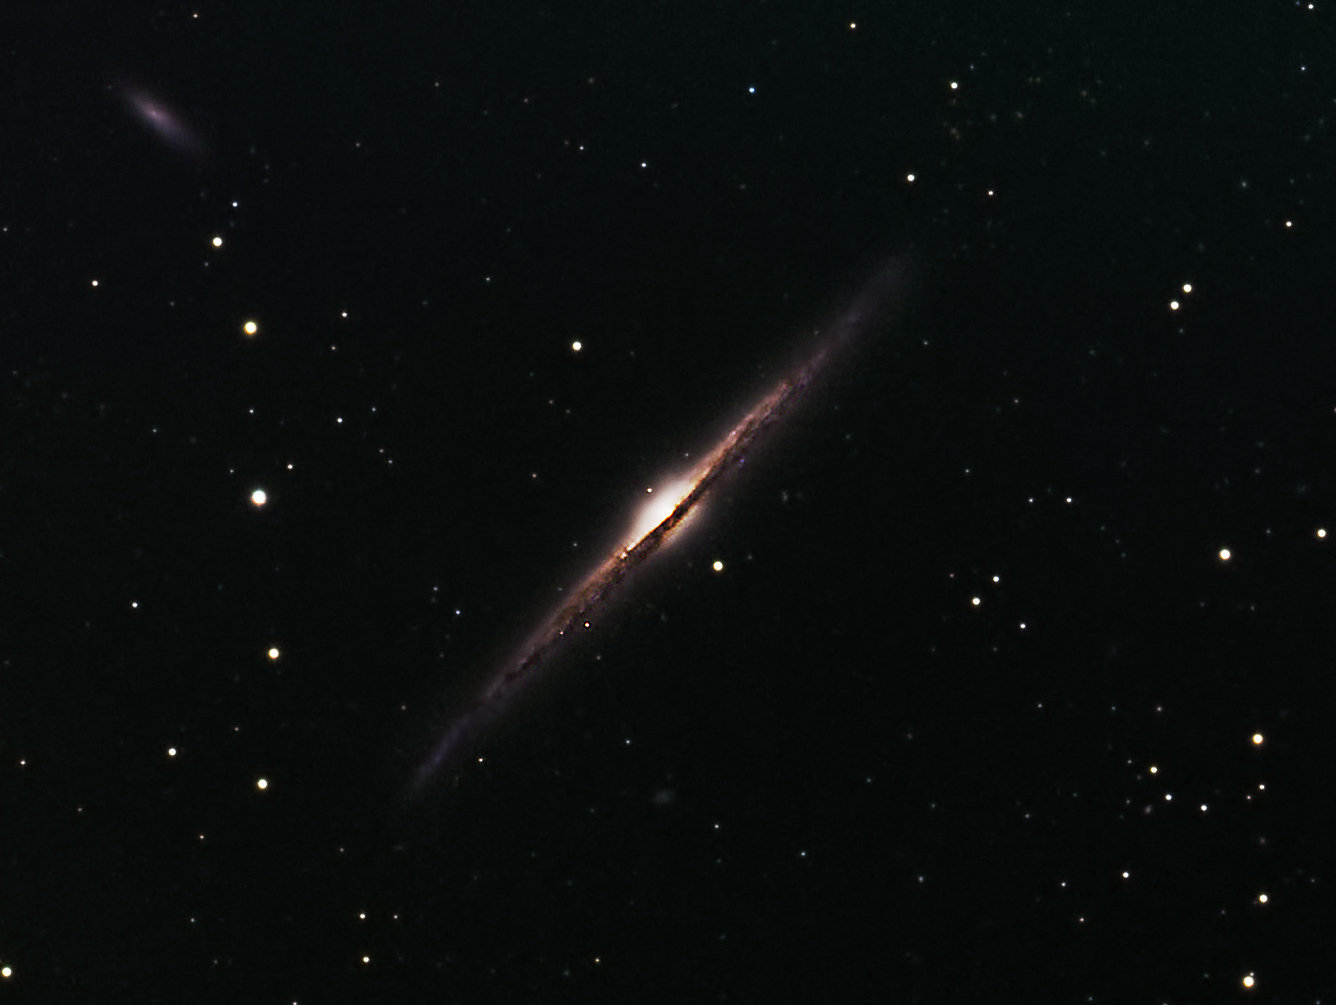 20100503_a130_ngc4565_rgb-in-ccdstack_ddp1-ps1-v4-for-websitescaled.jpg